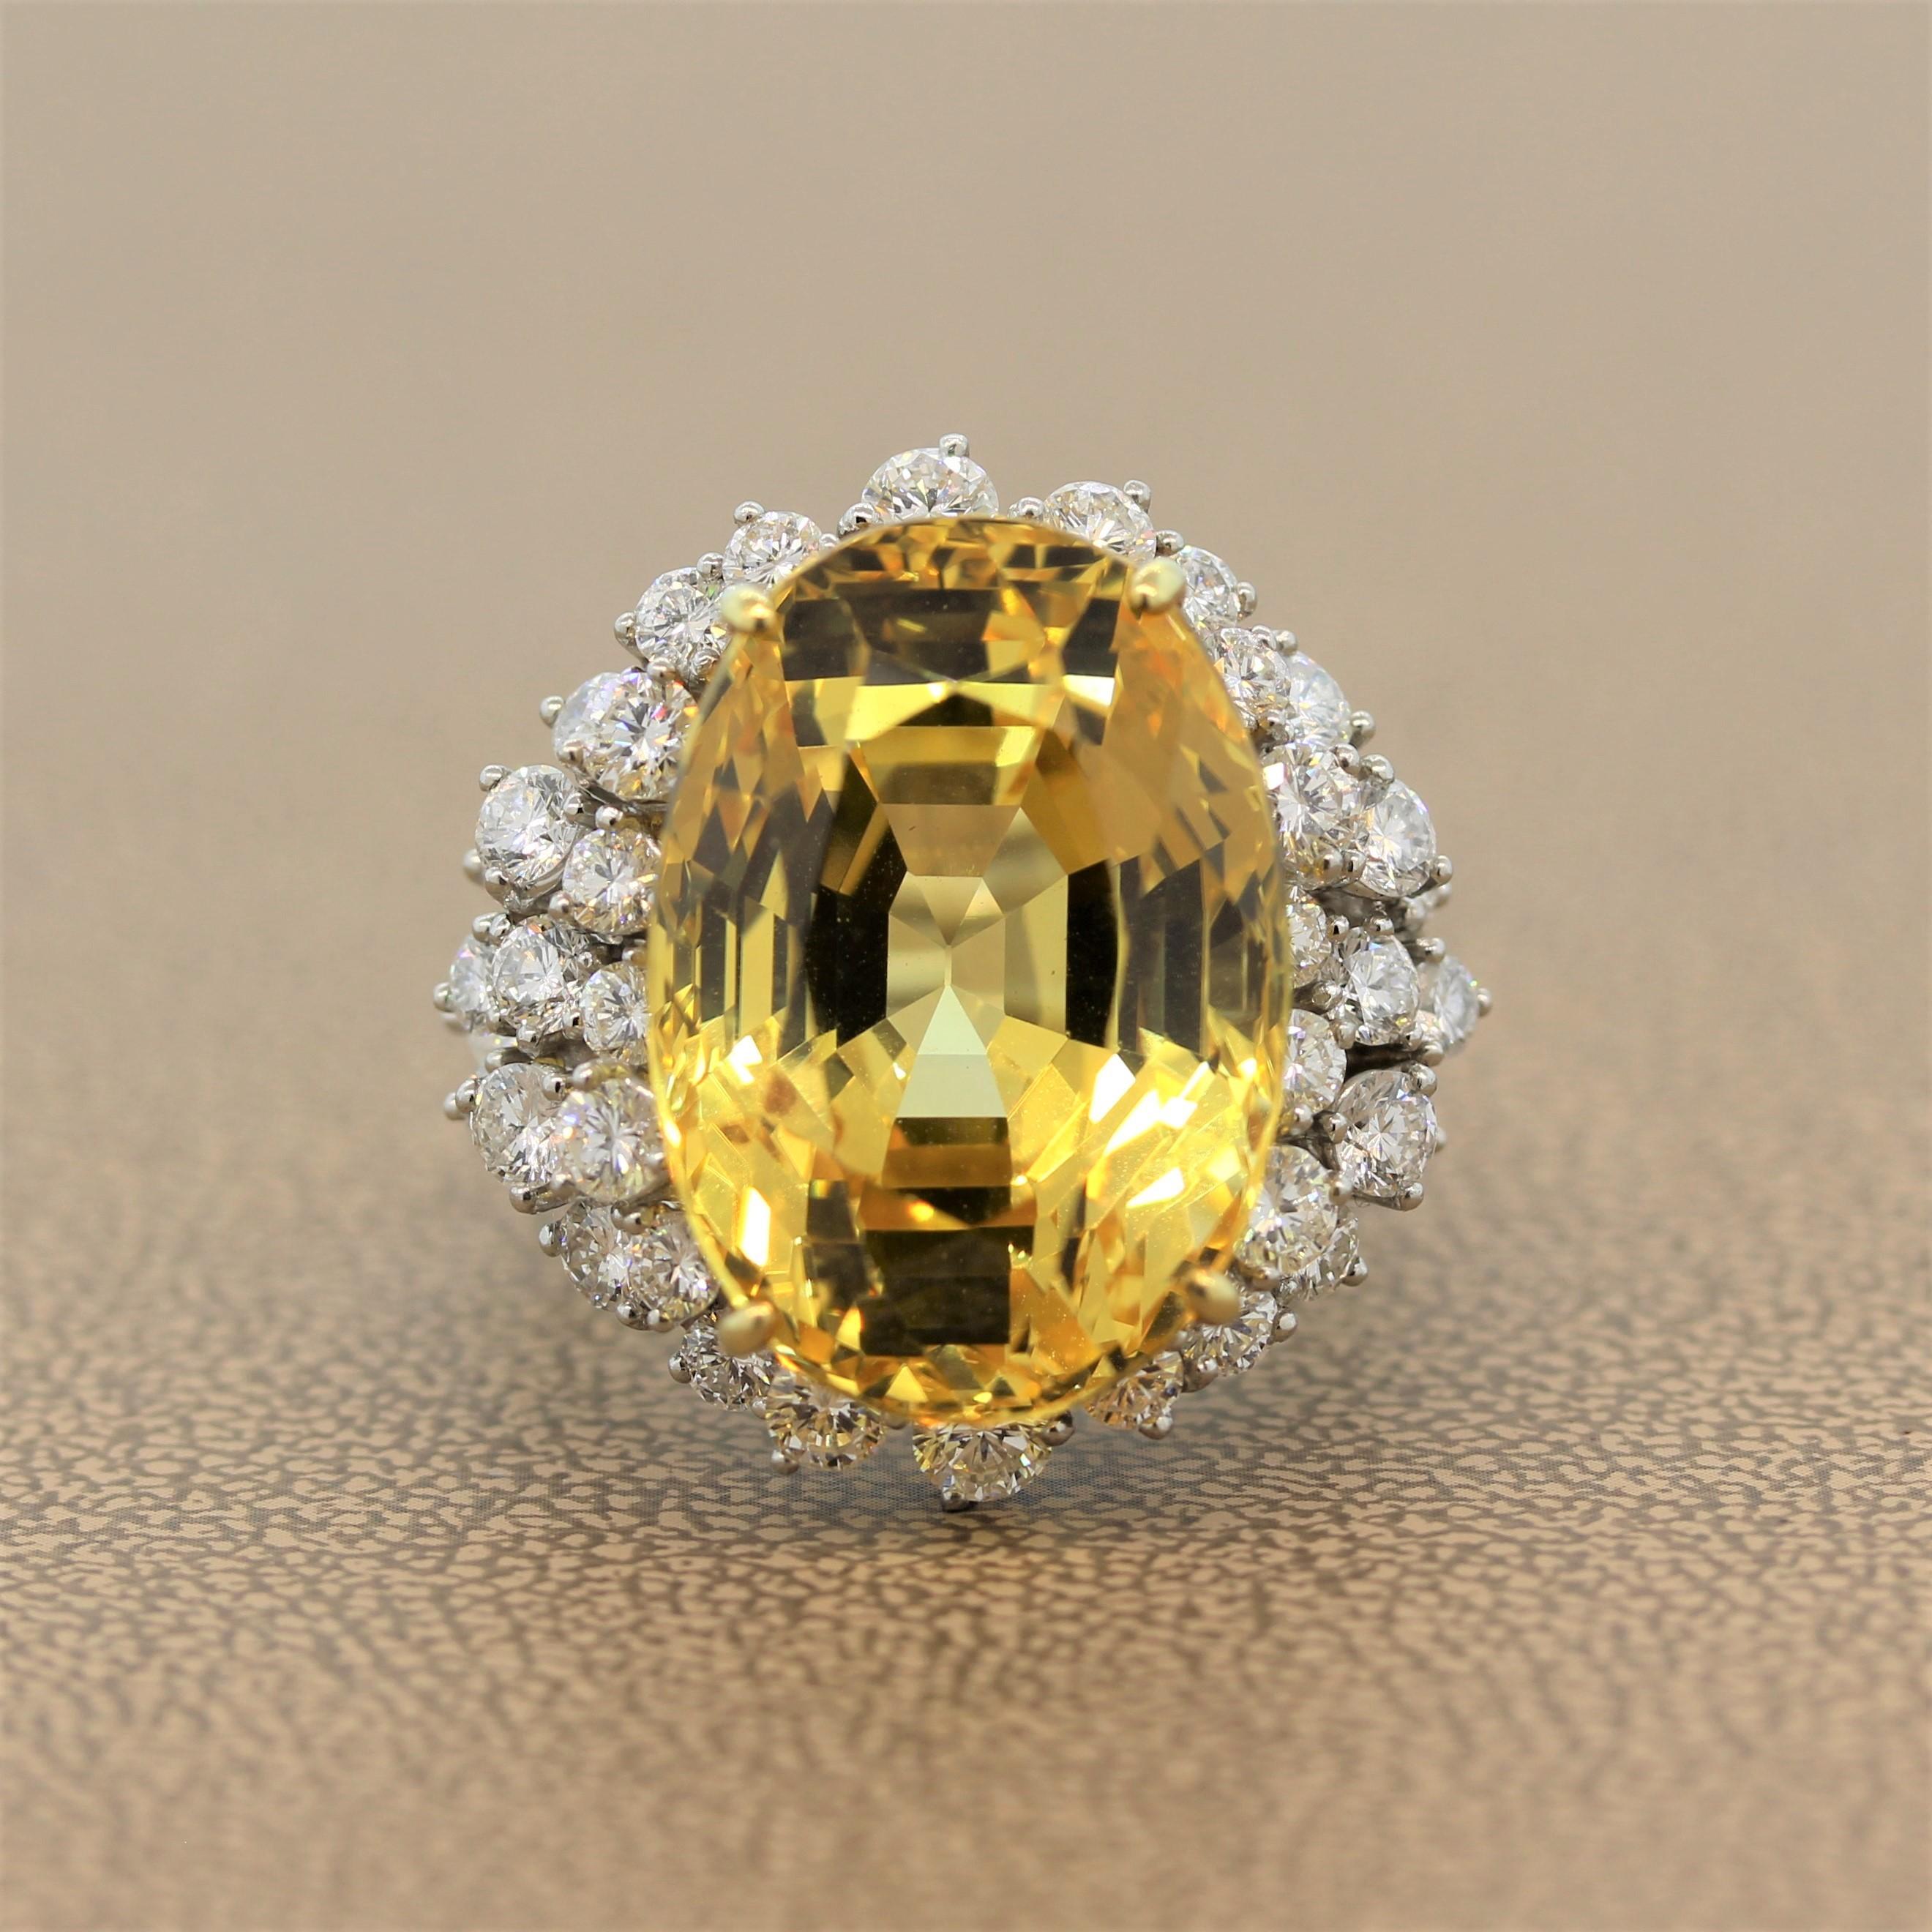 A great cocktail ring featuring an extremely rare 35.00 carat AGL certified unheated yellow sapphire. The vibrant pure yellow colored sapphire has a beautiful cut and shape enhancing its brilliance and light return to the eye. It is enclosed by a